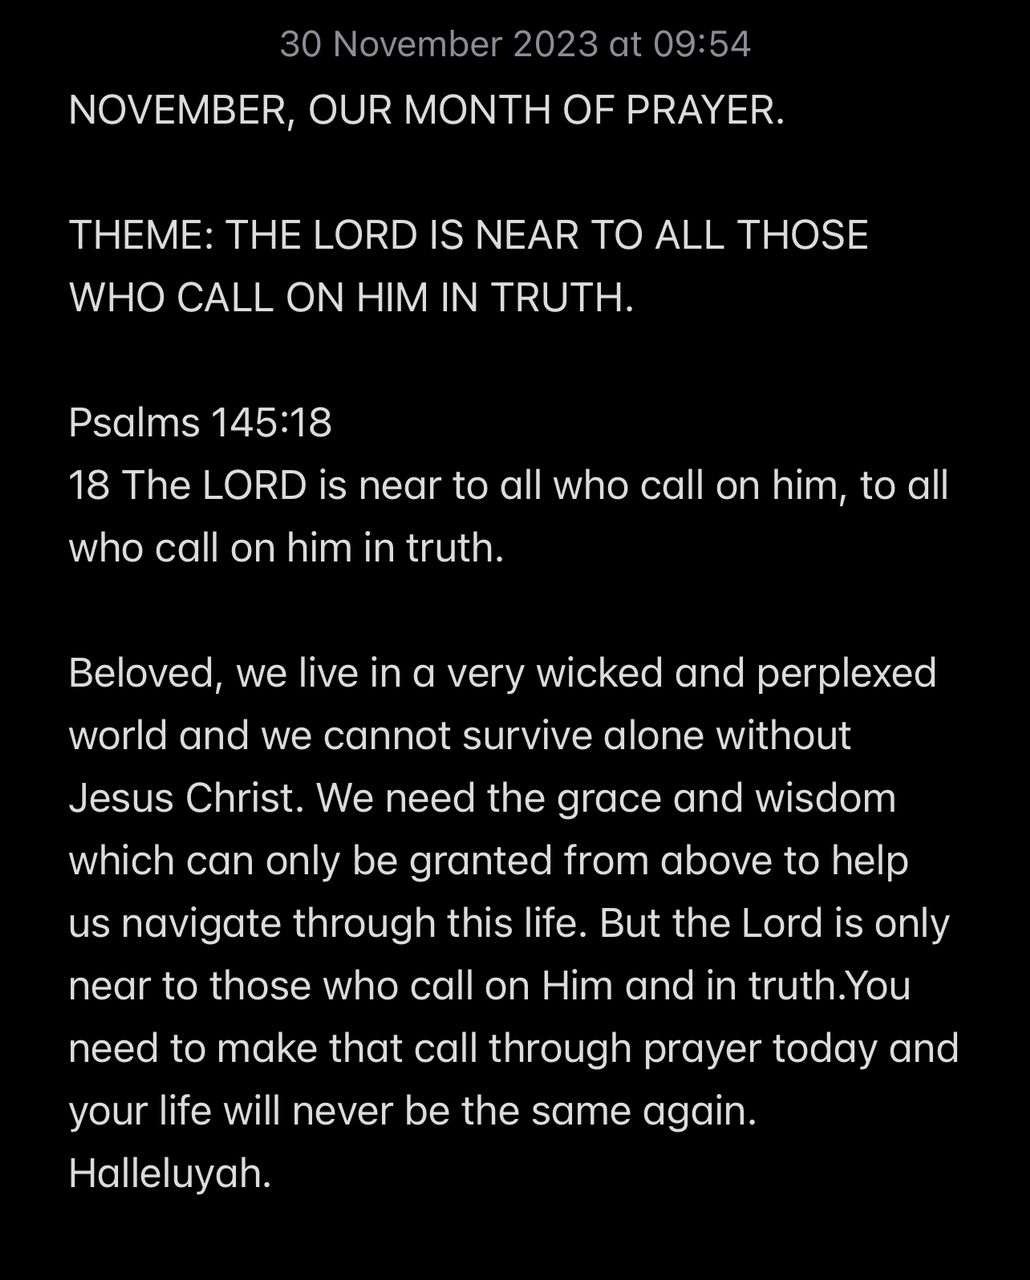 THE LORD IS NEAR TO ALL THOSE WHO CALL ON HIM IN TRUTH.